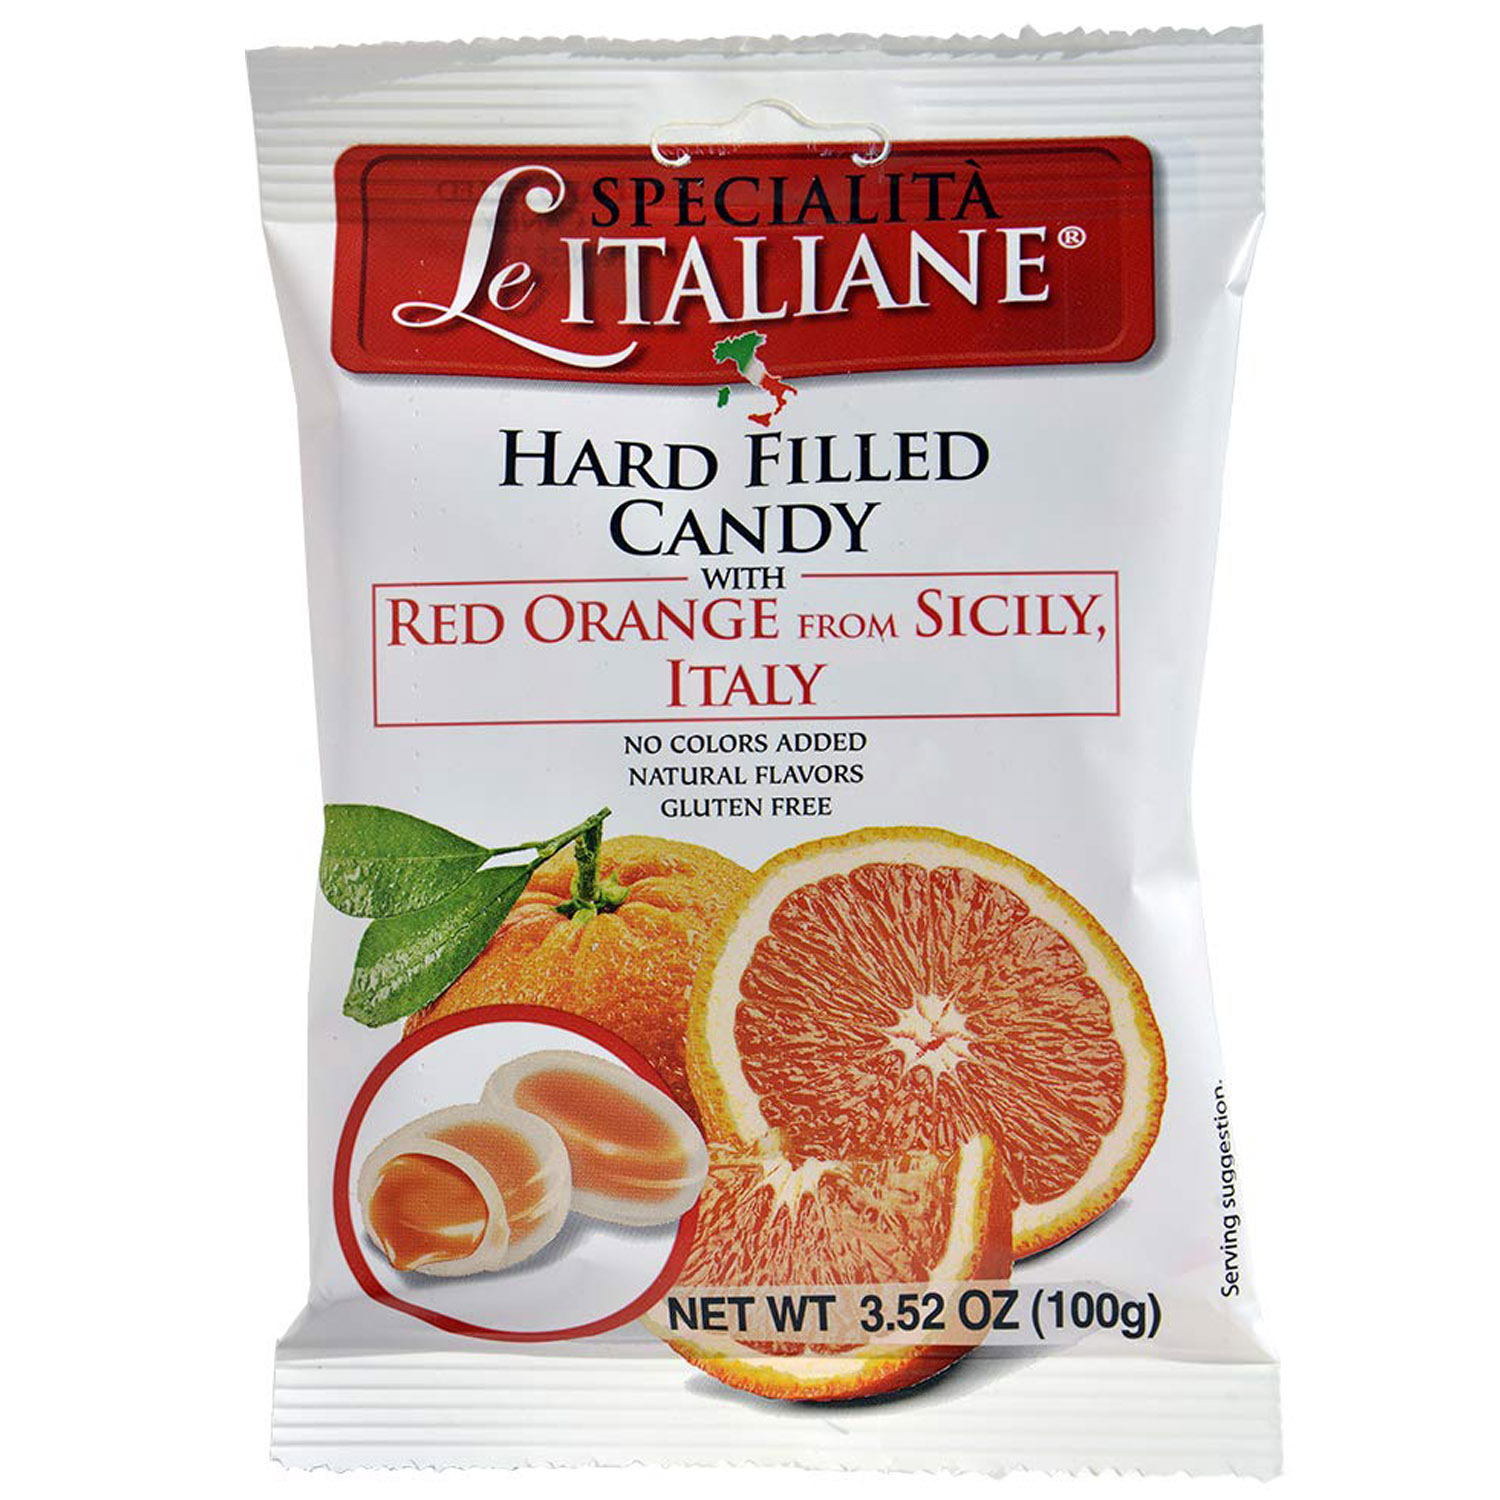 Конфеты Le Specialitа Italiane Serra Hard Filled Candy with Red Orange from Sicily 100 г - фото 1